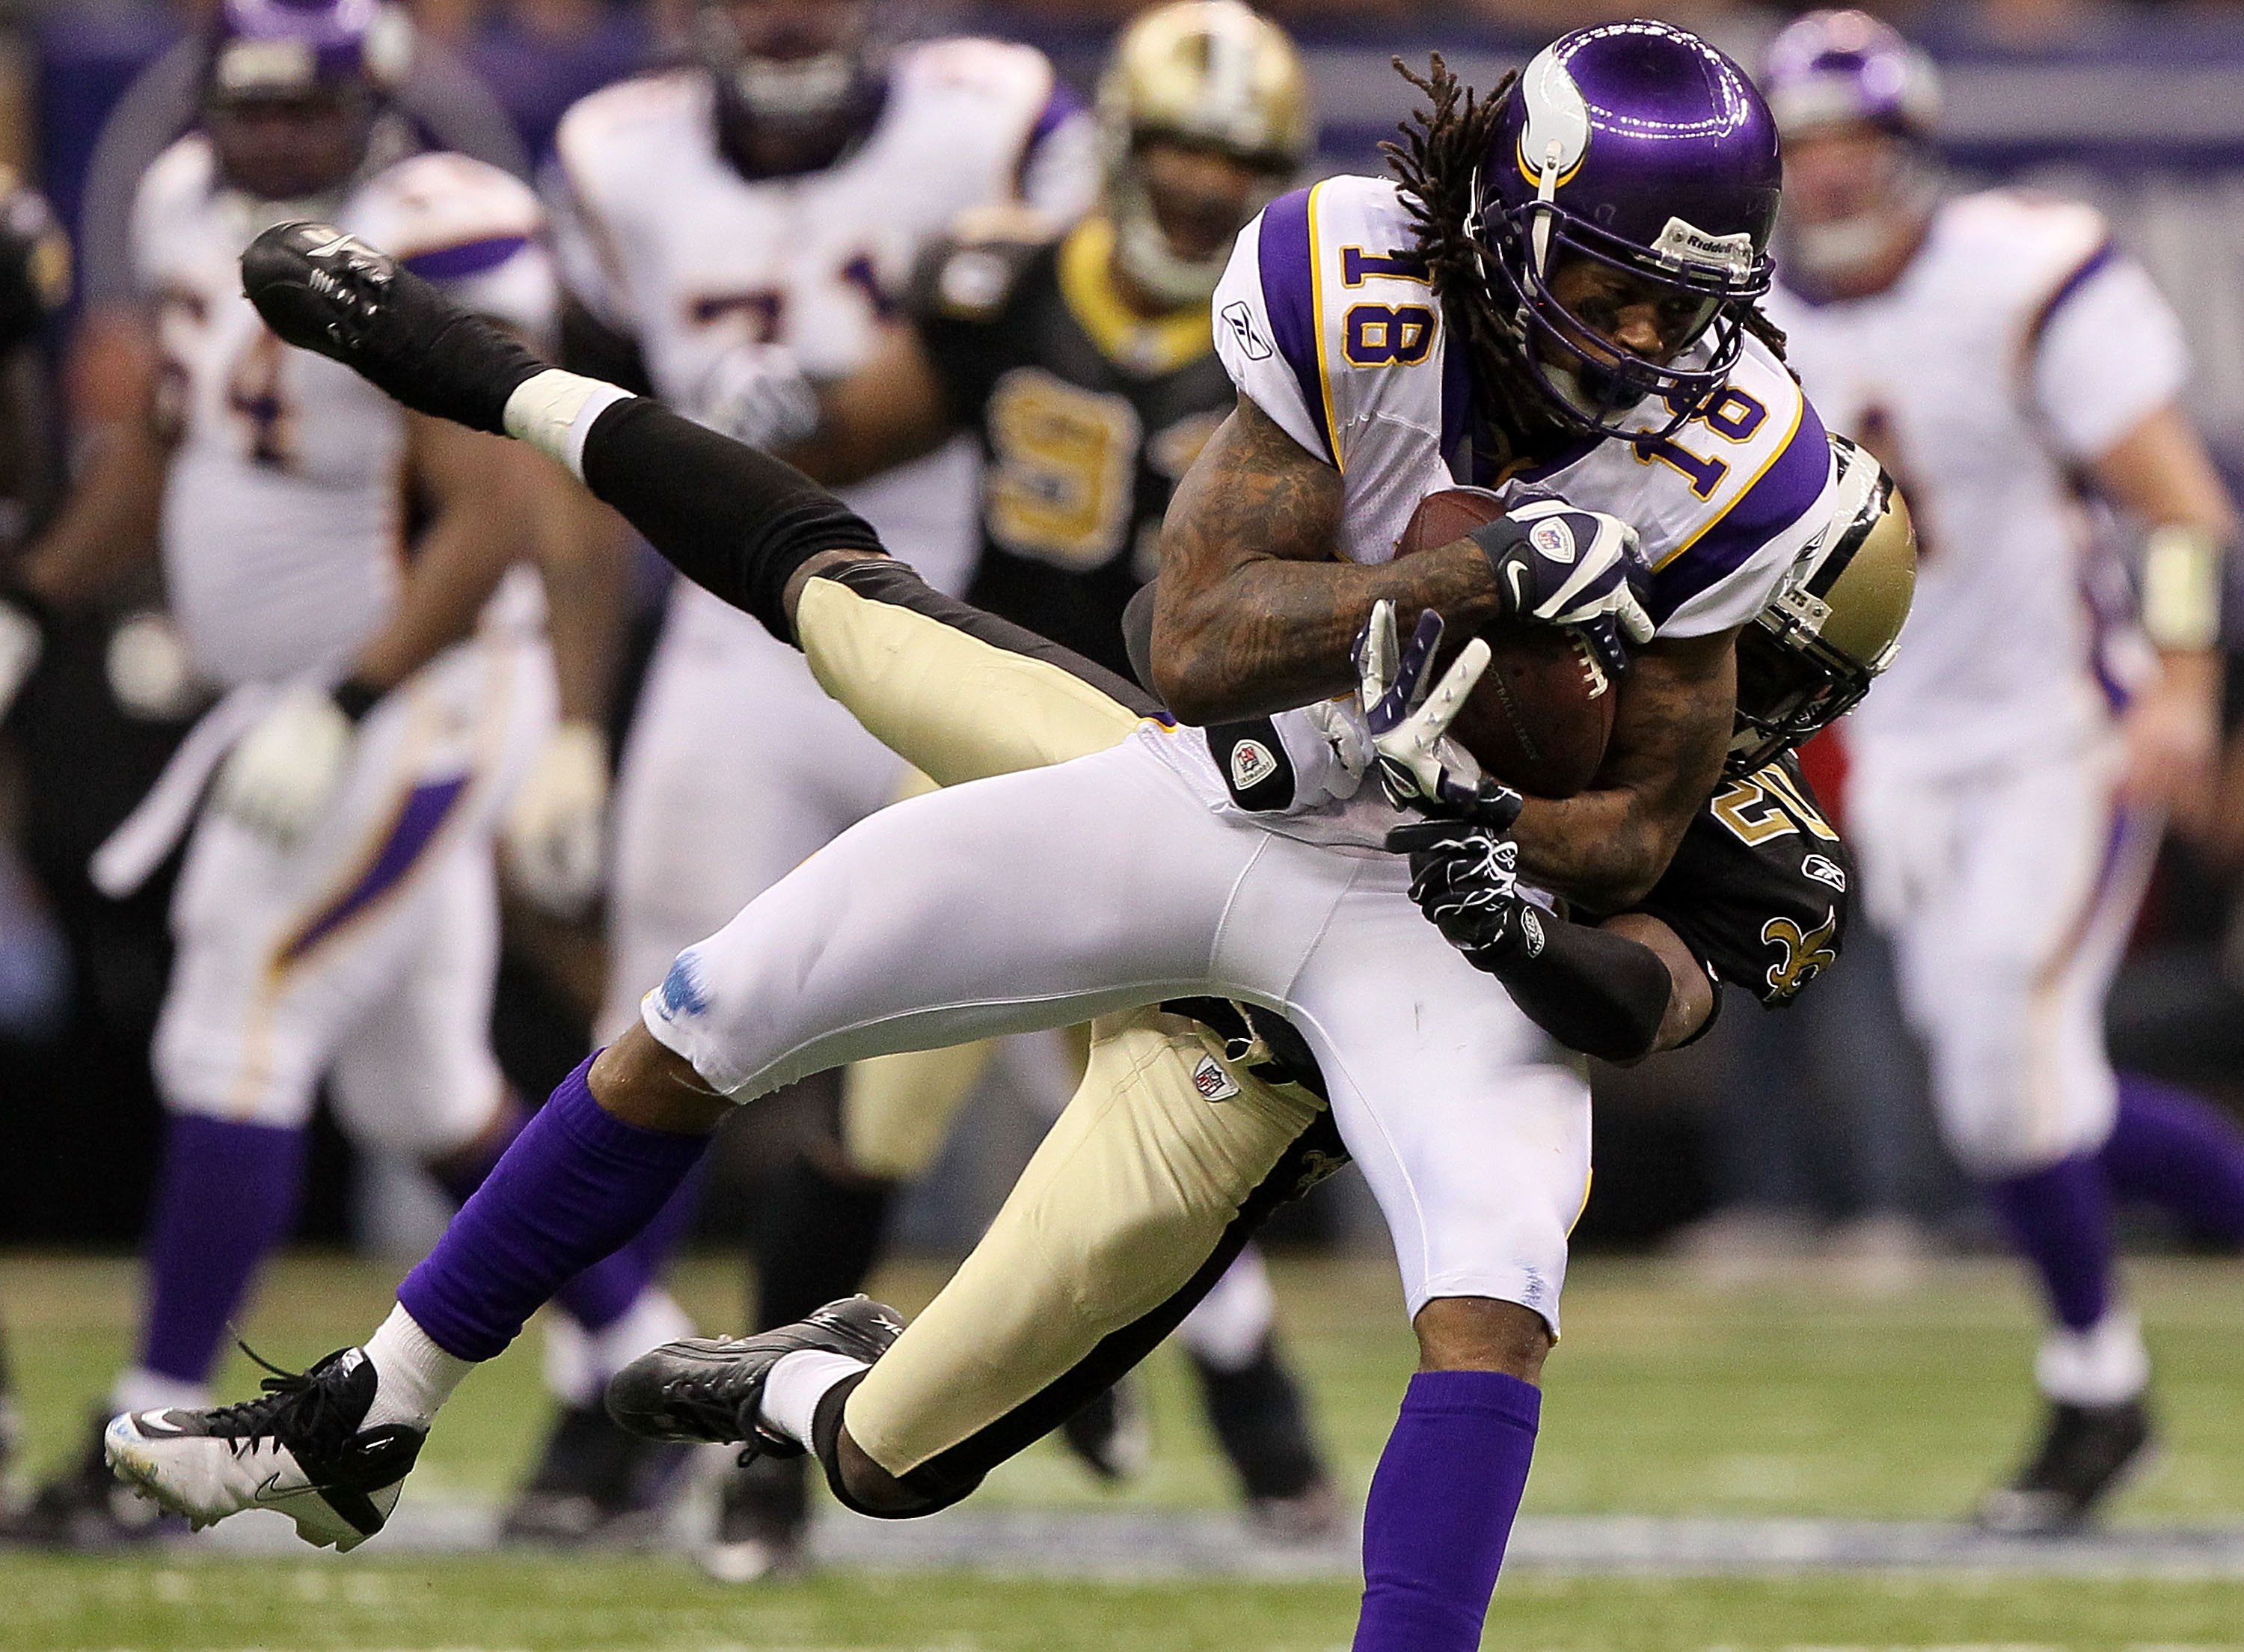 NEW ORLEANS - JANUARY 24:  Sidney Rice #18 of the Minnesota Vikings makes a reception against Randall Gay #20 of the New Orleans Saints during the NFC Championship Game at the Louisiana Superdome on January 24, 2010 in New Orleans, Louisiana. The Saints w